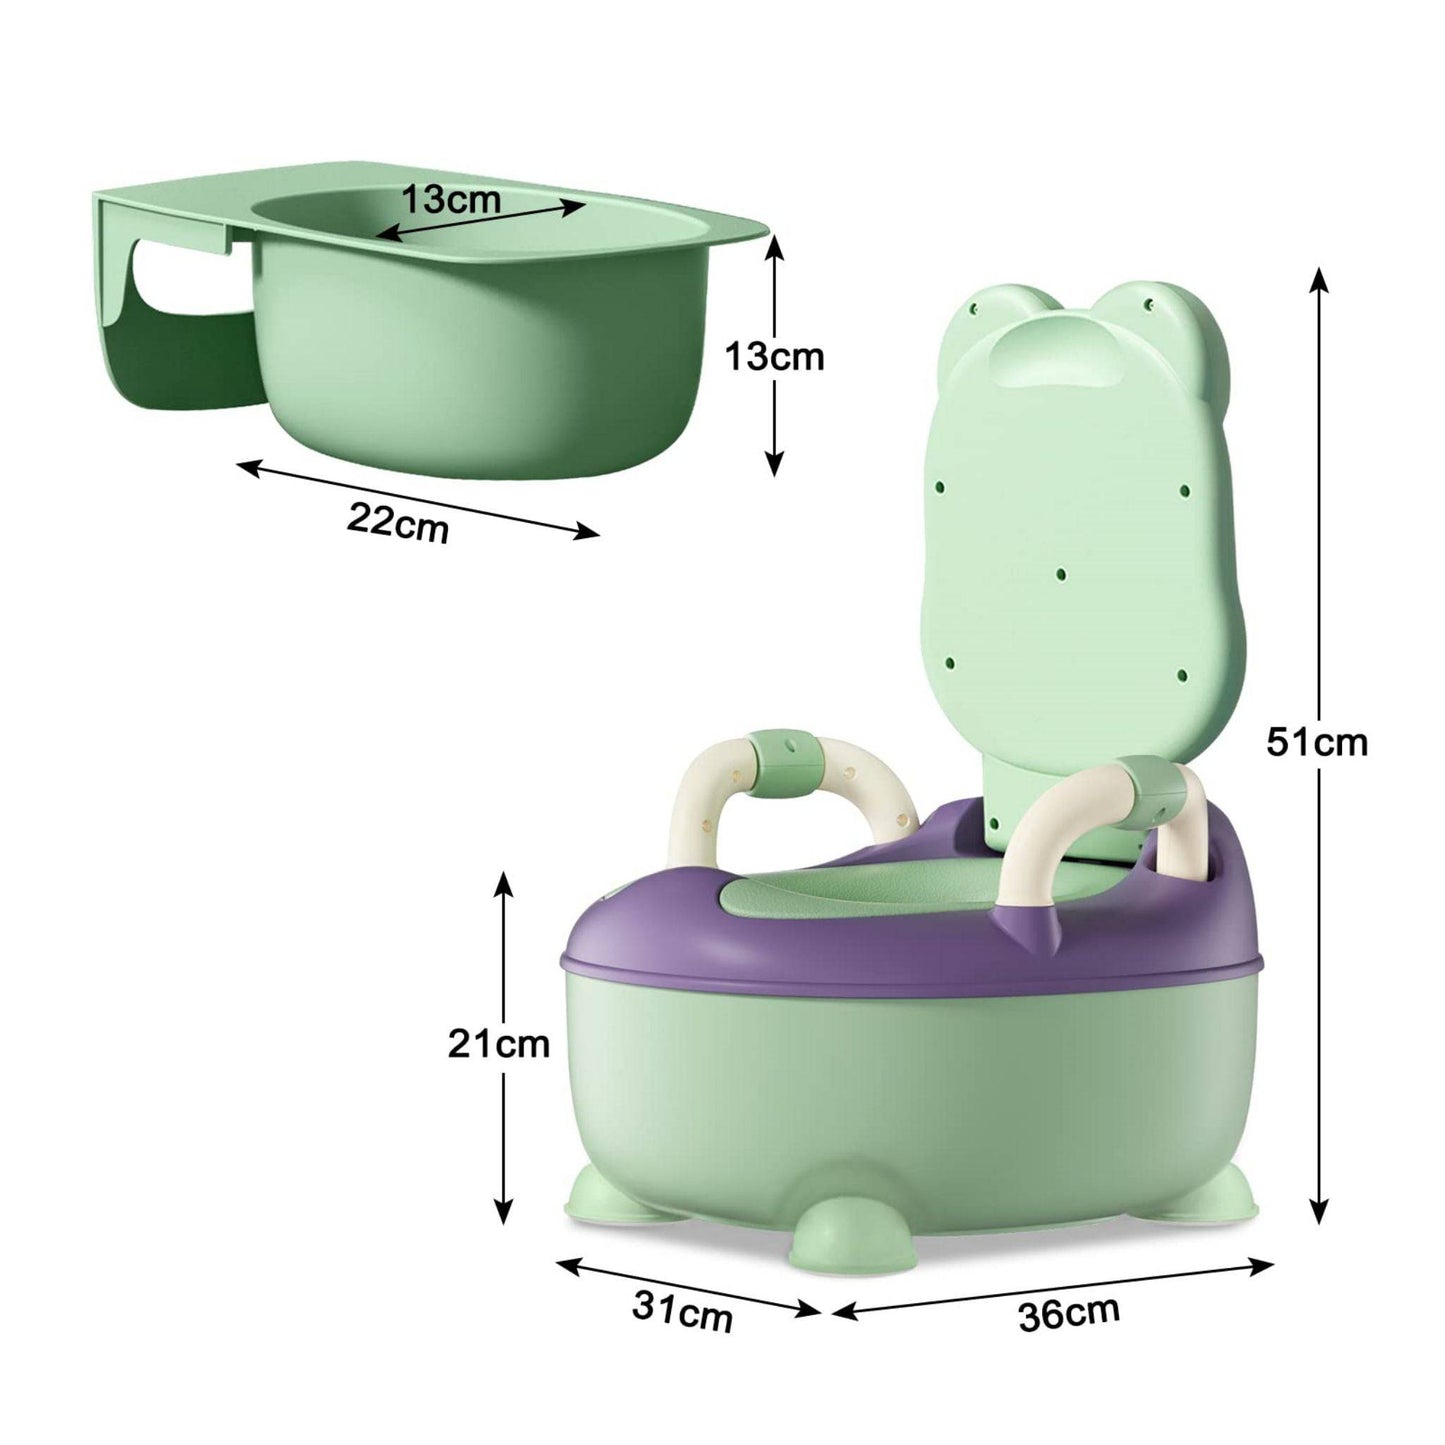 COOLBABY Potty Coach Baby Potty Training, Toddler Potty Chair With Lid and High Back Support Removable Potty Basin, Portable Children Travel Potty Outdoor Camping - COOL BABY